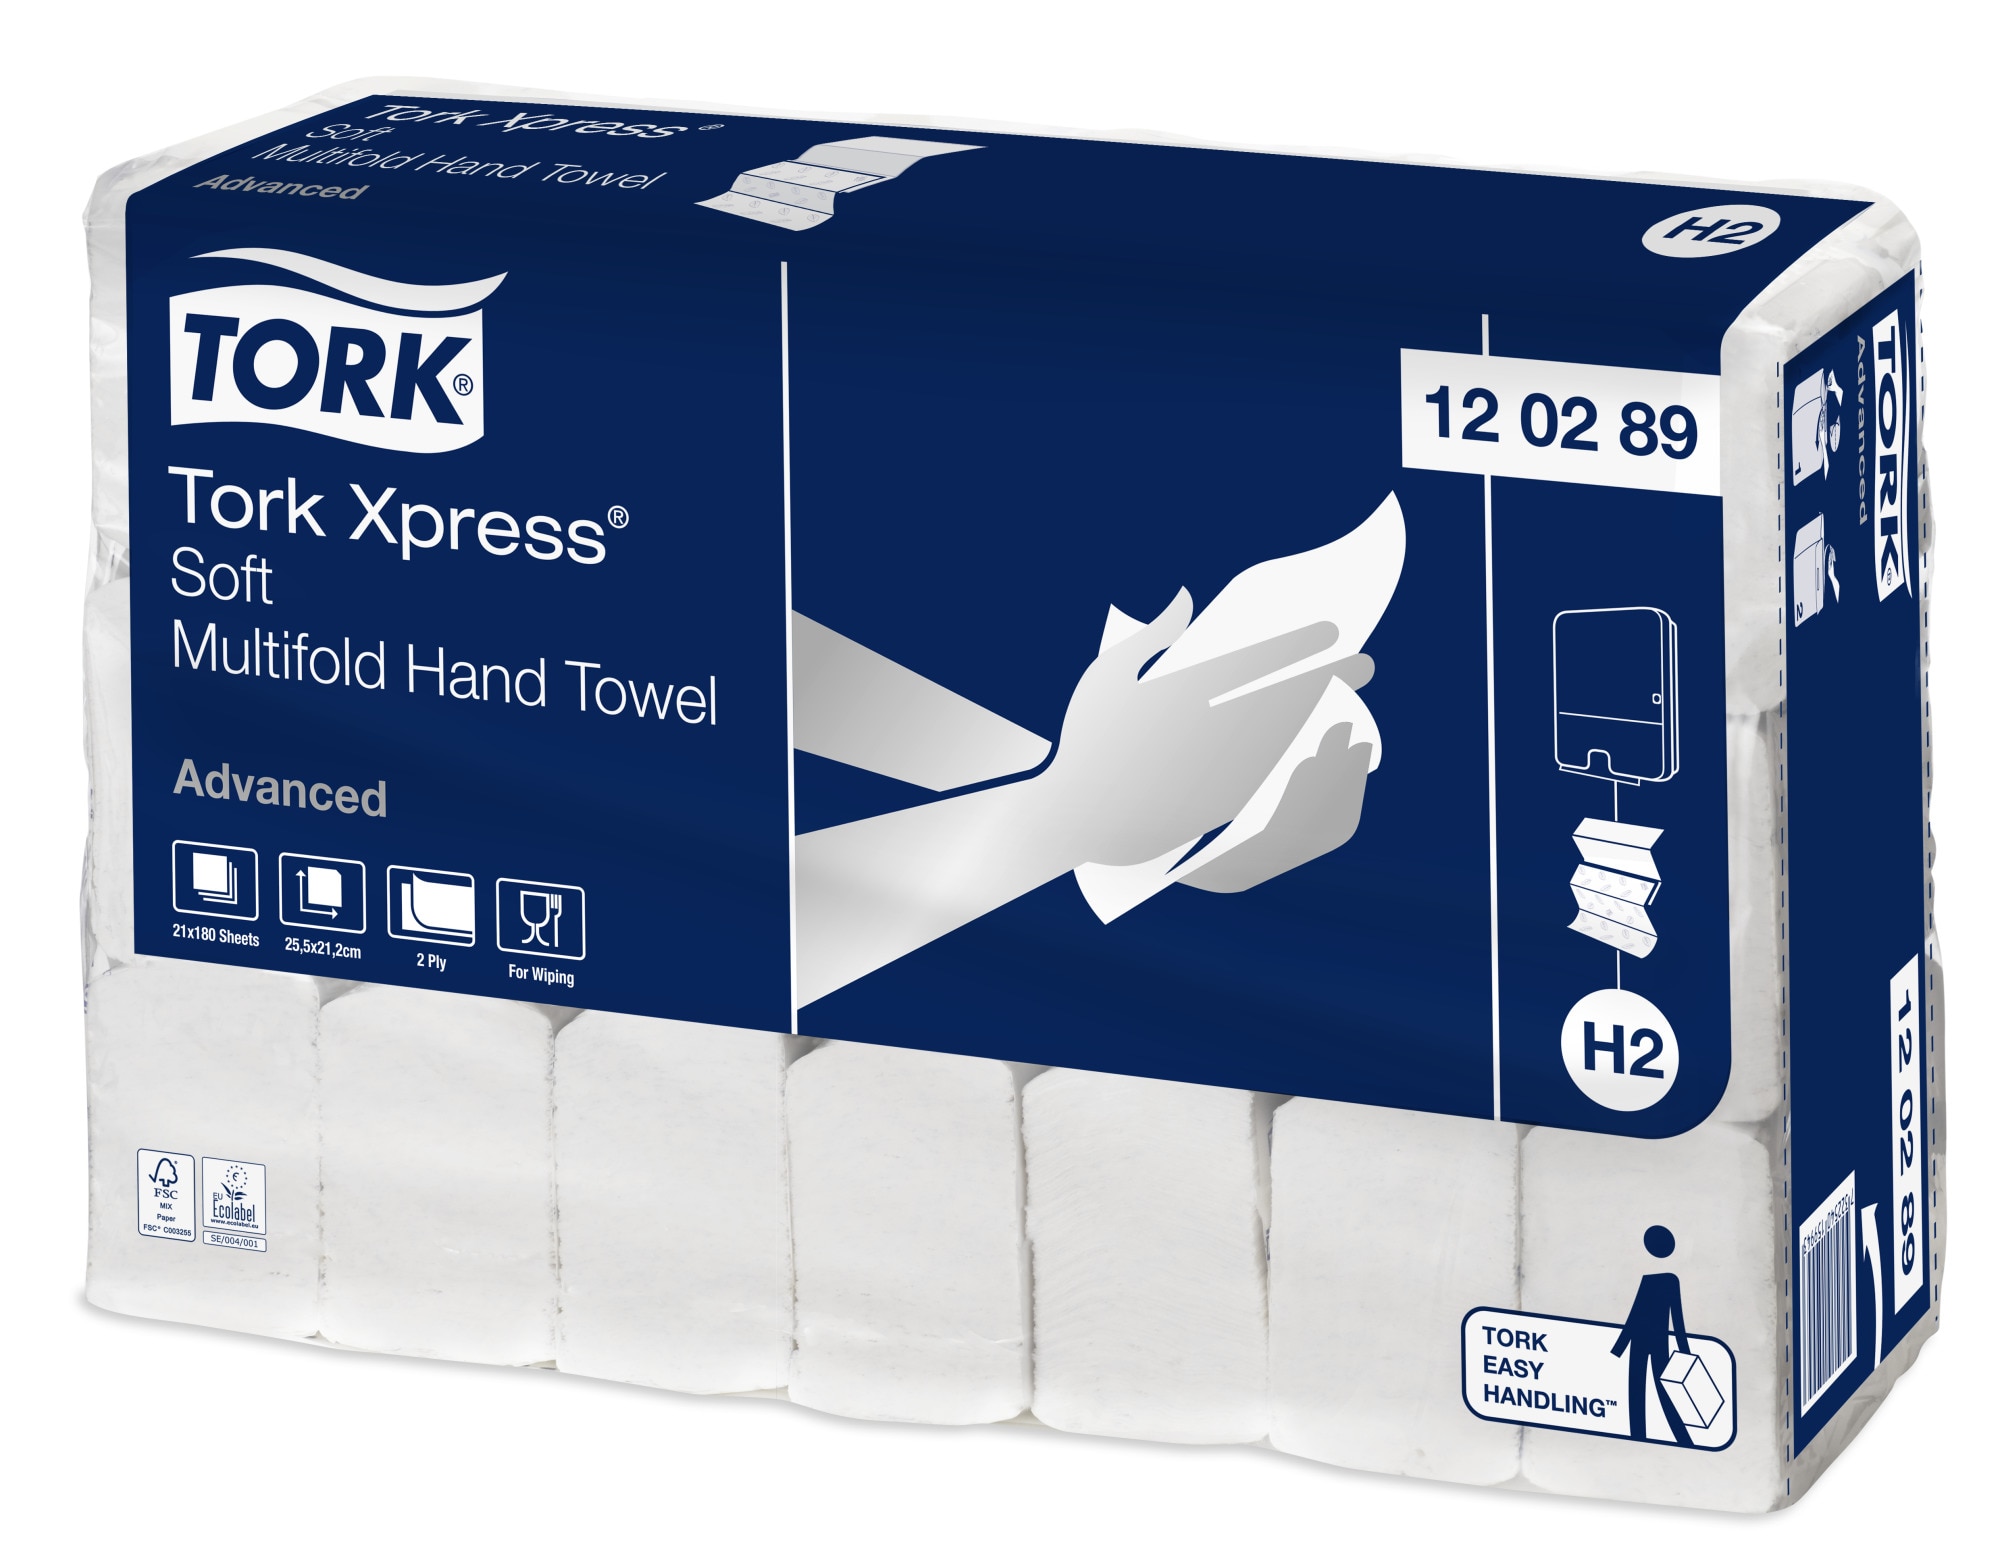 H2 Premium Paper Hand Tork Xpress Extra Soft Multifold Hand Towels 600297 